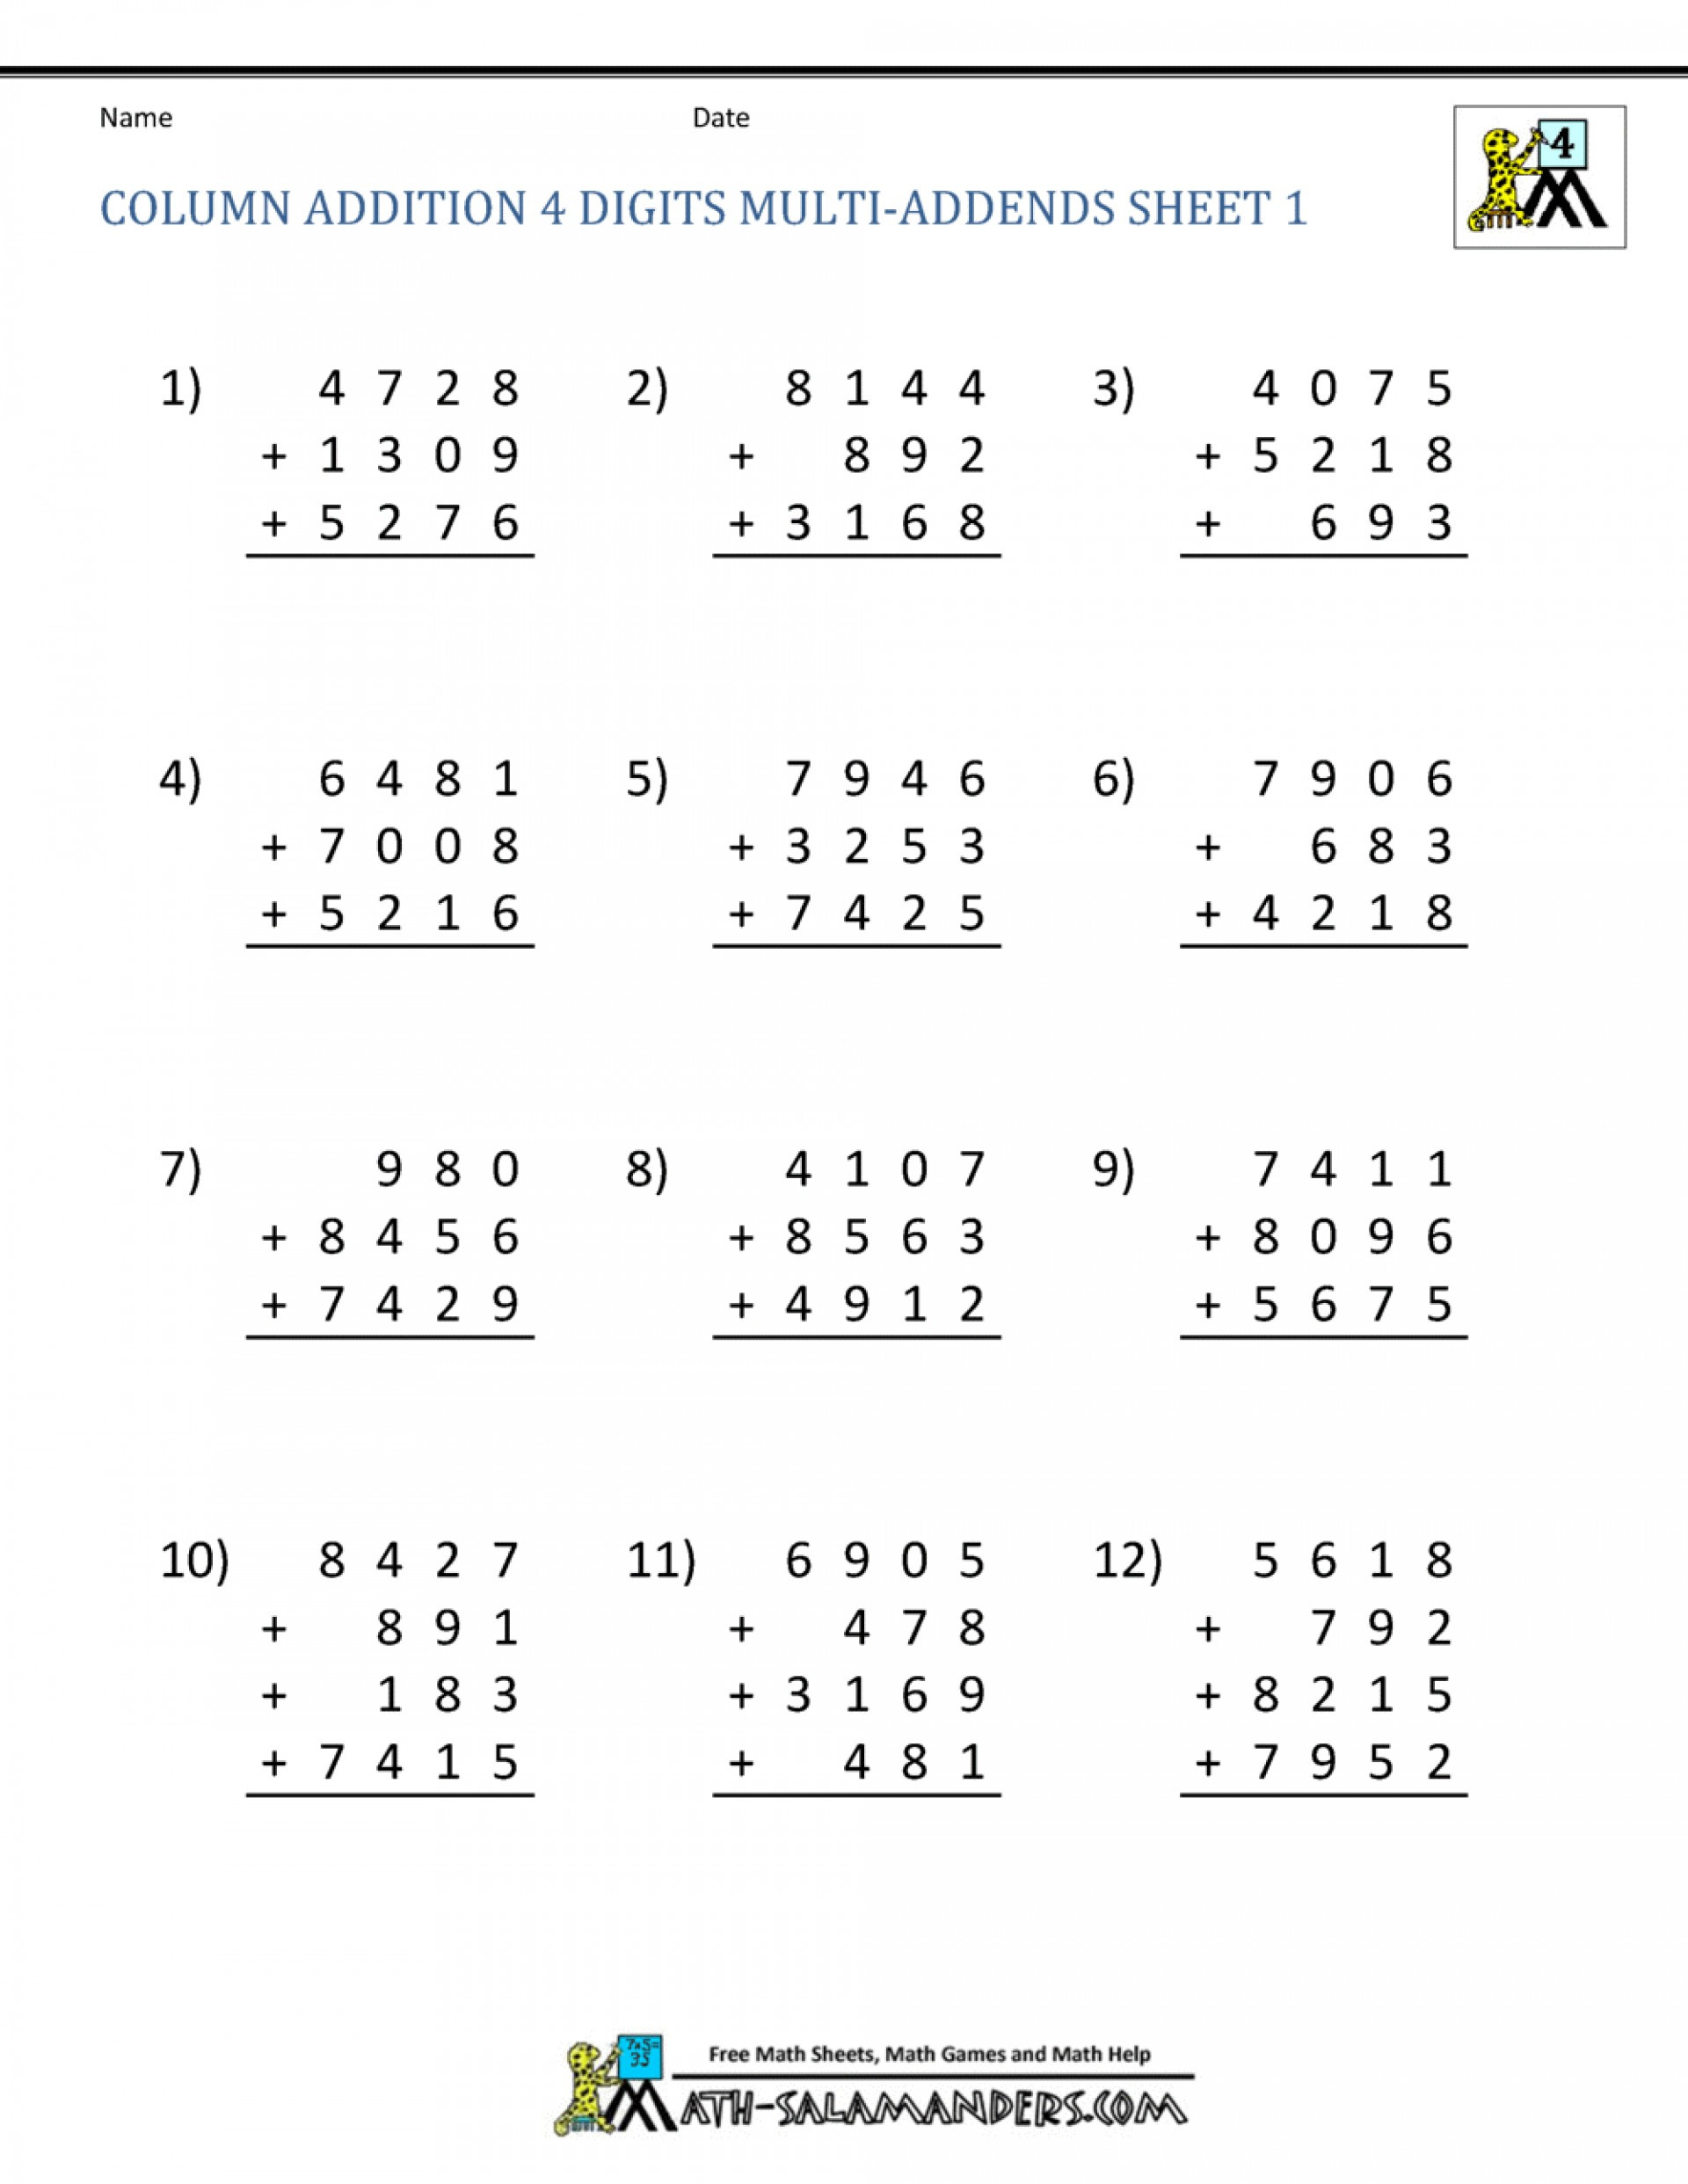 Free Math Worksheets Second Grade 2 Addition Add 4 2 Digit Numbers In Columns